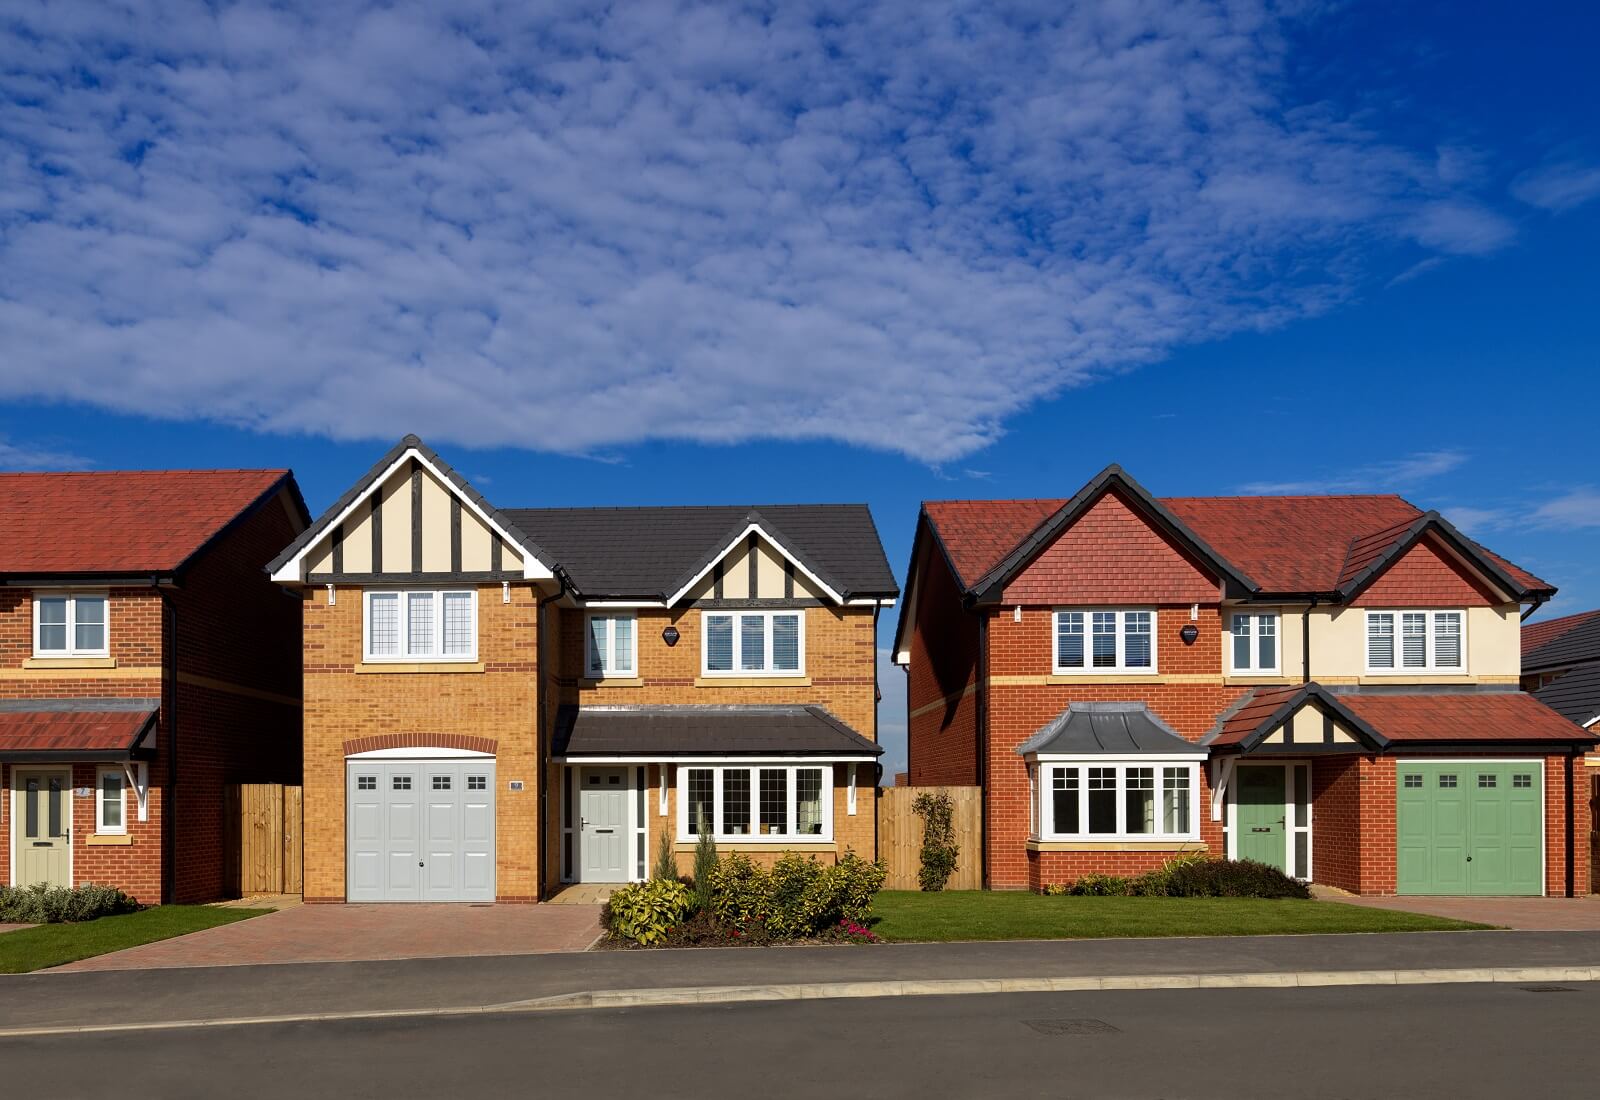 Old or new? The benefits of buying a new-build home.